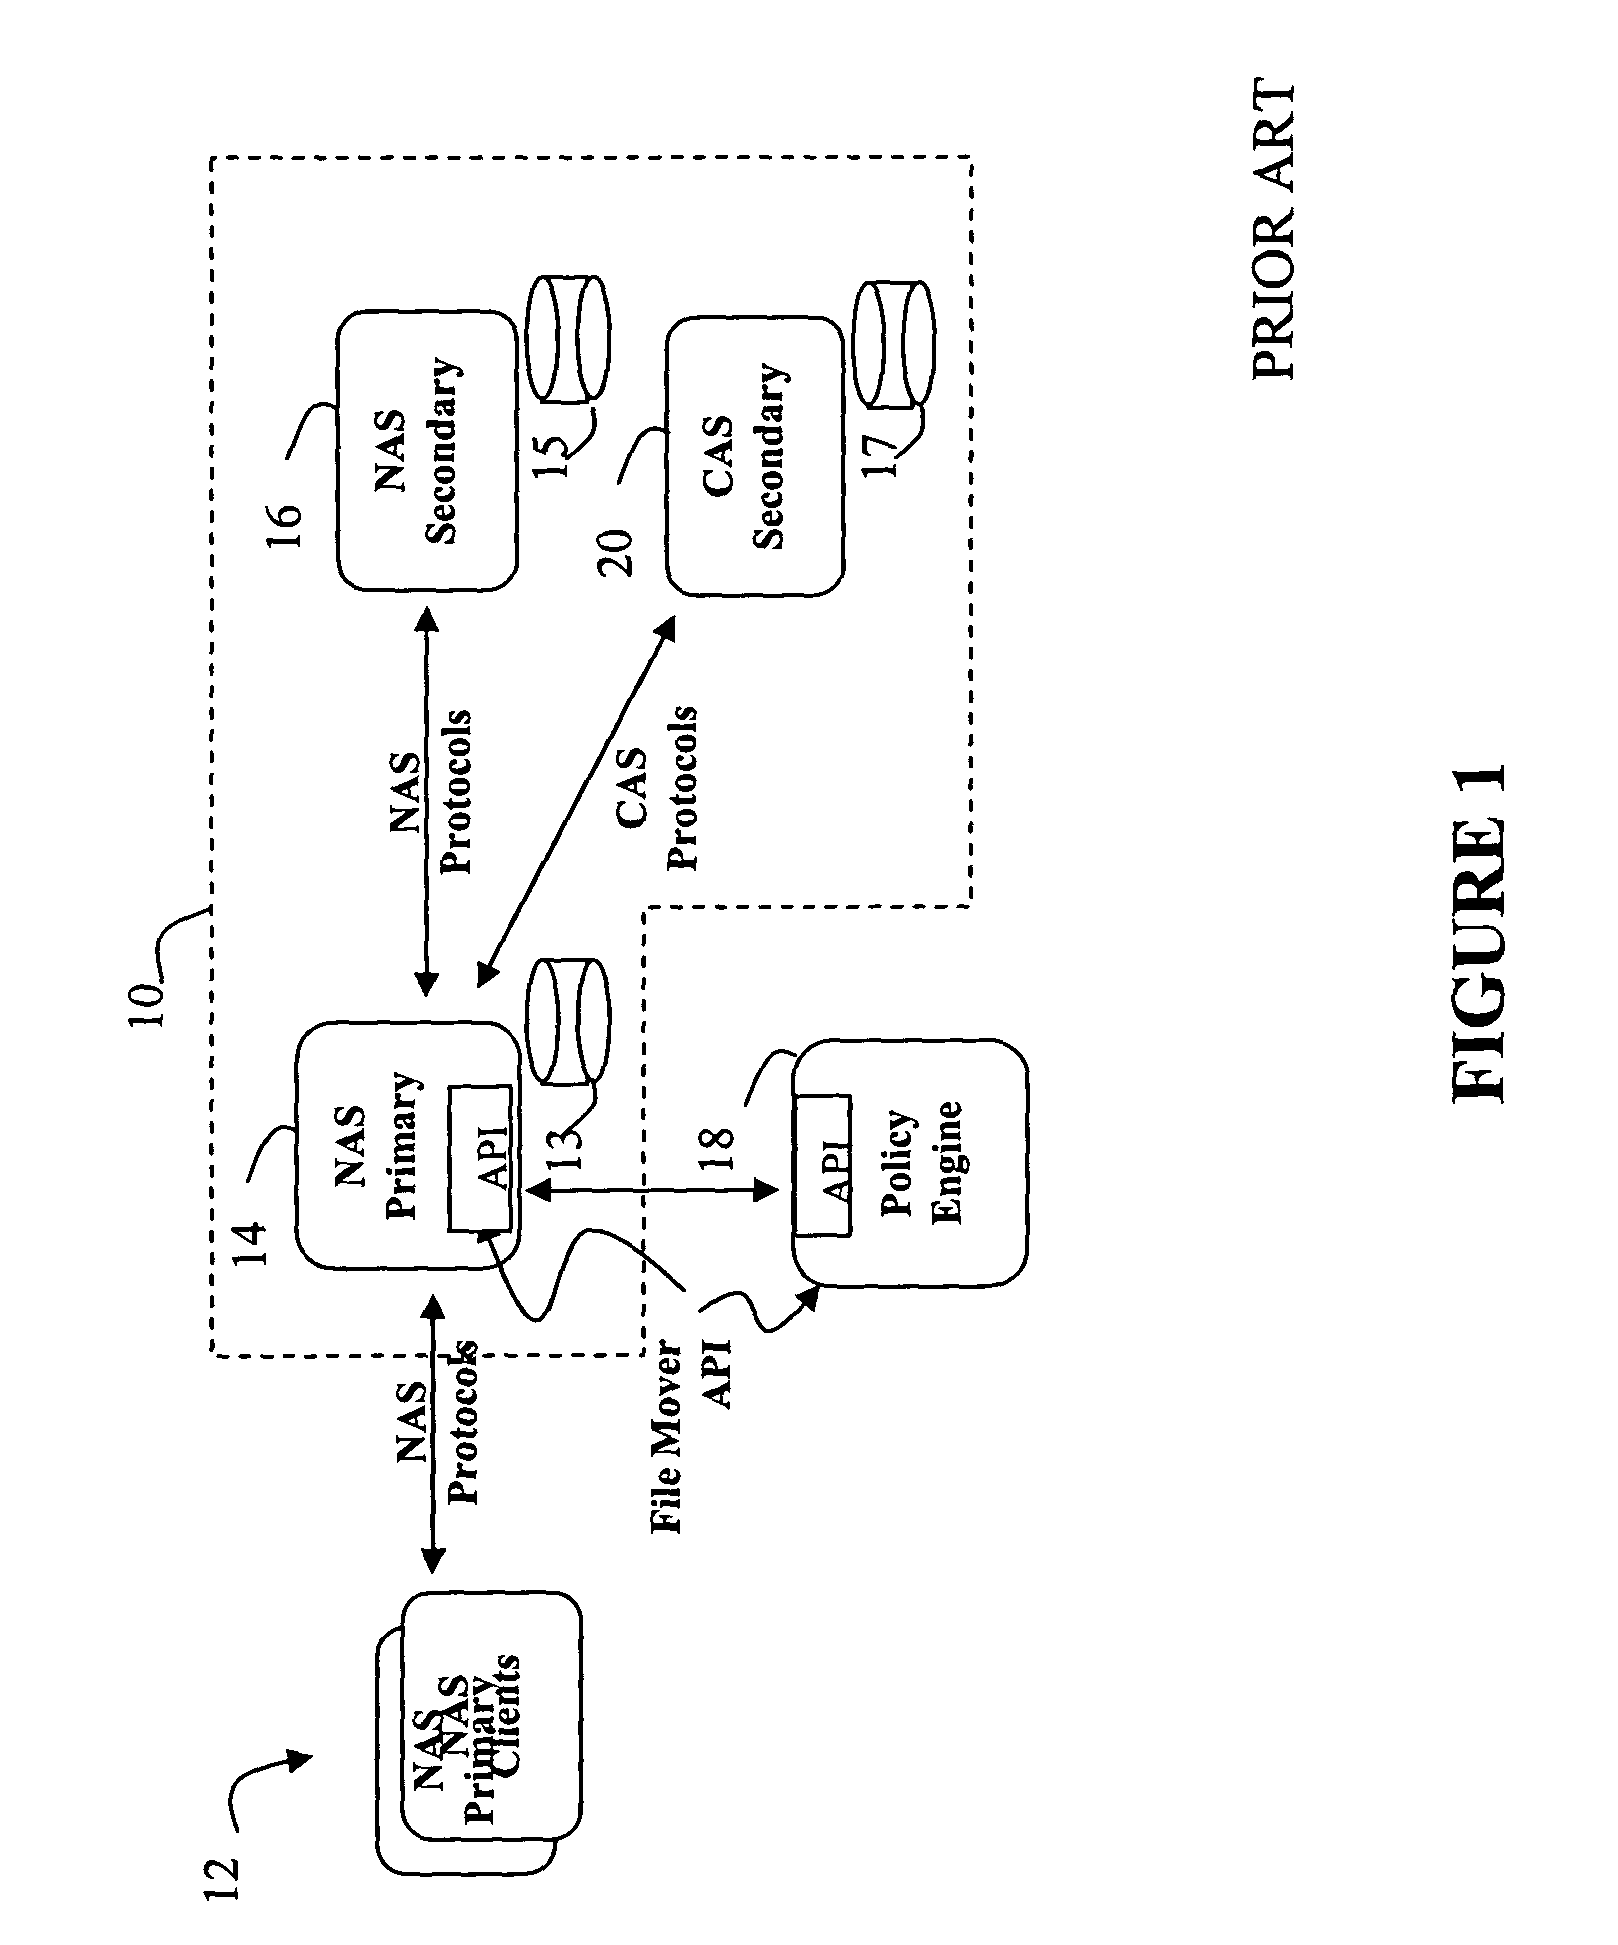 File system query and method of use